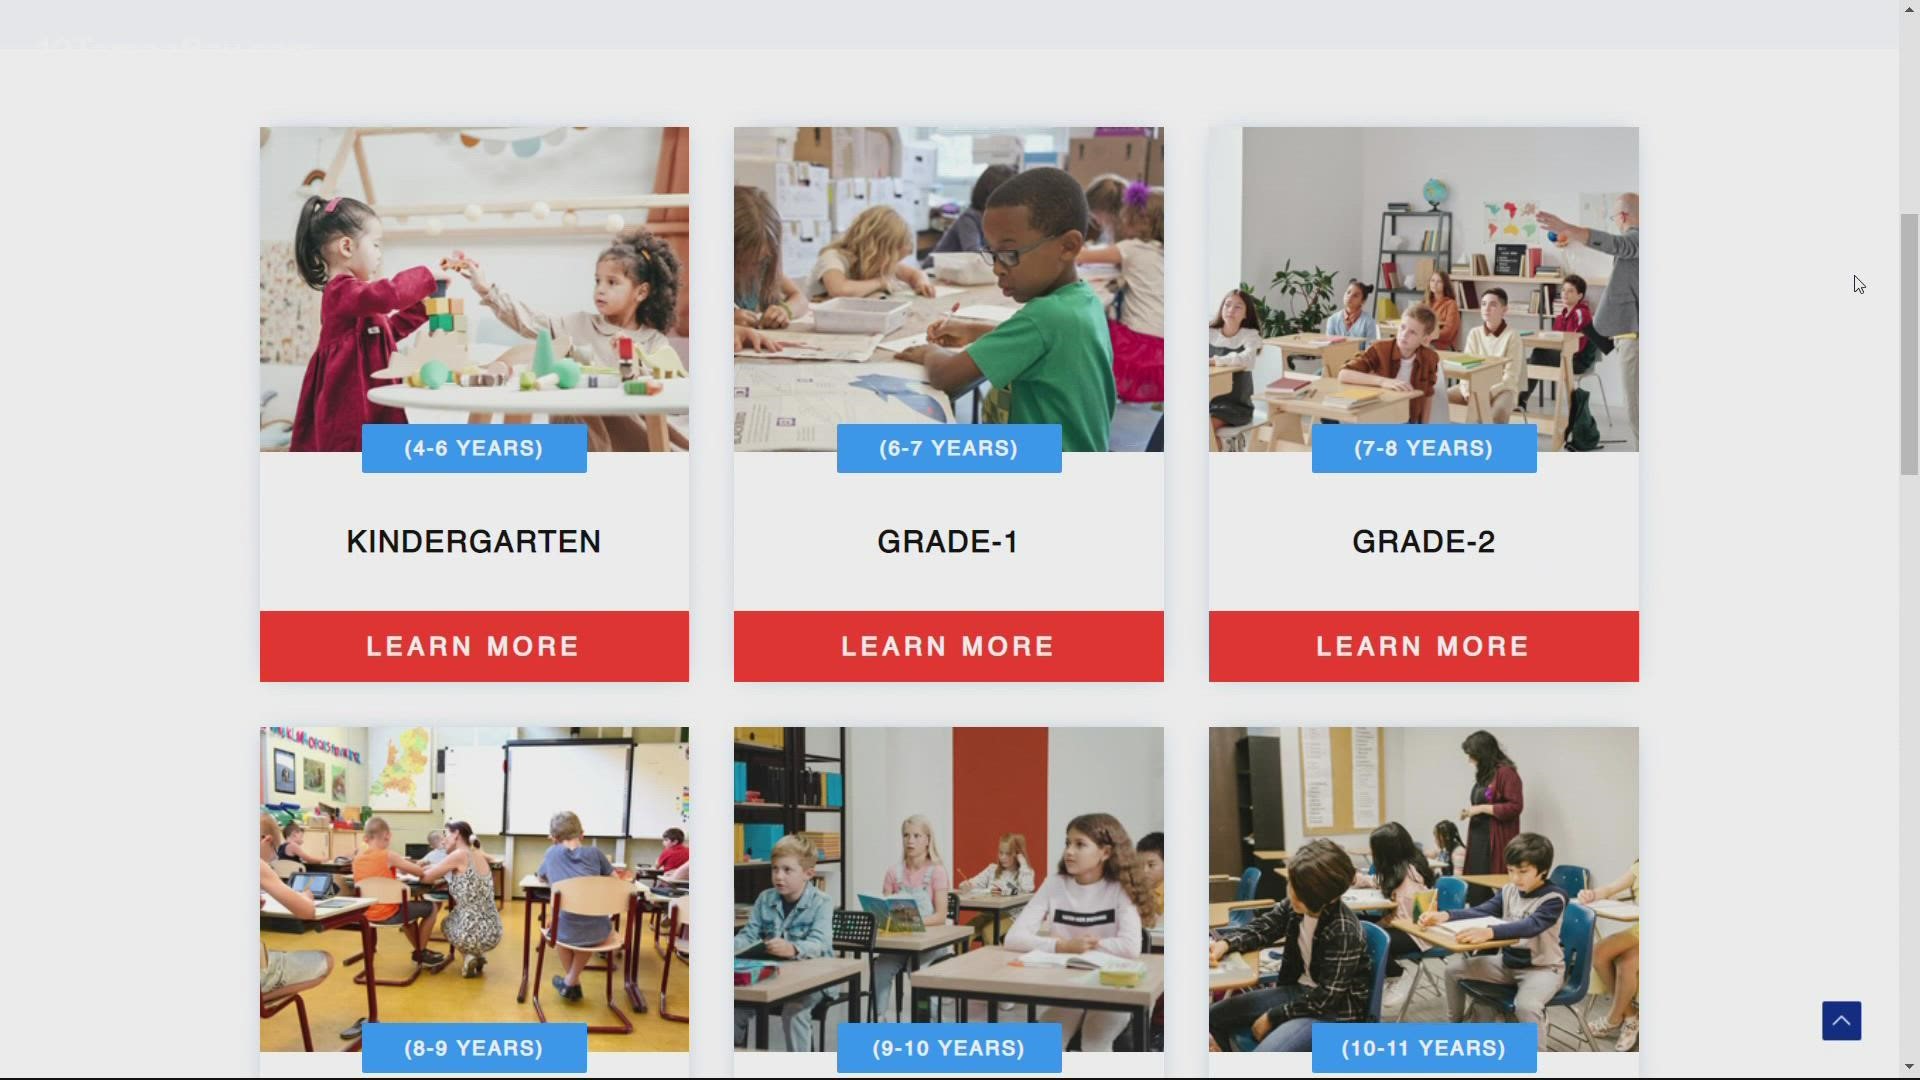 The organization has created a free online program for teachers to use in their classrooms.